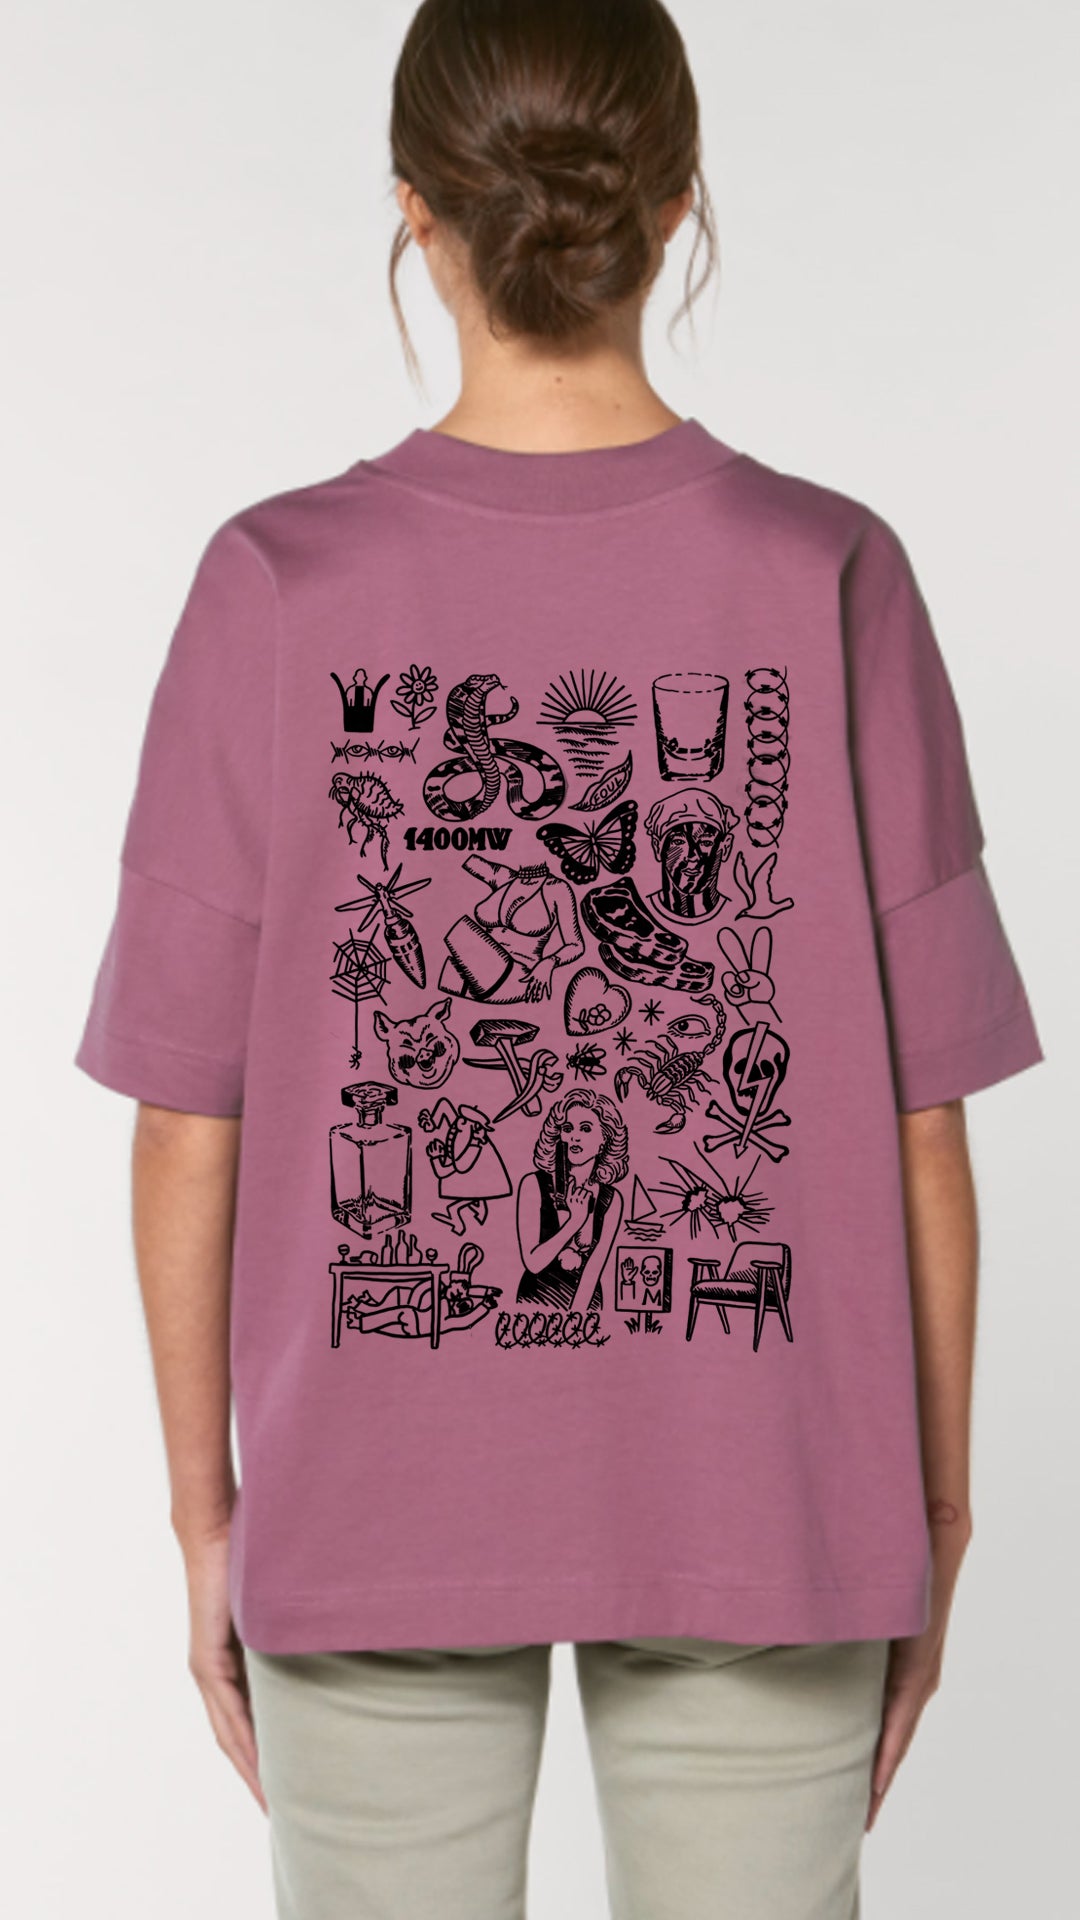 FLASH tshirt in Mauve - SOLD OUT